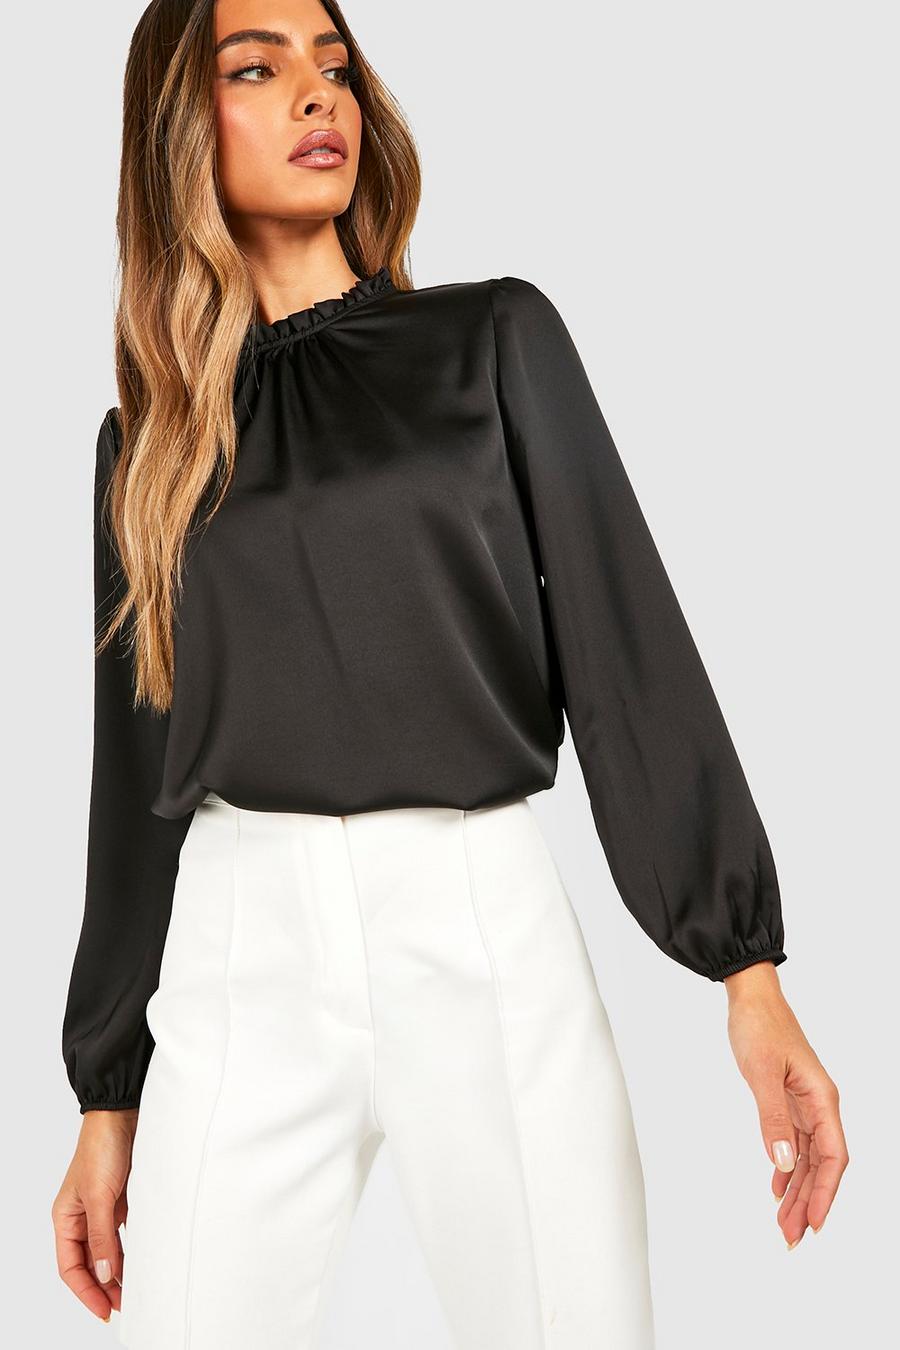 Black Satin Frill Neck Long Sleeve Woven Blouse image number 1